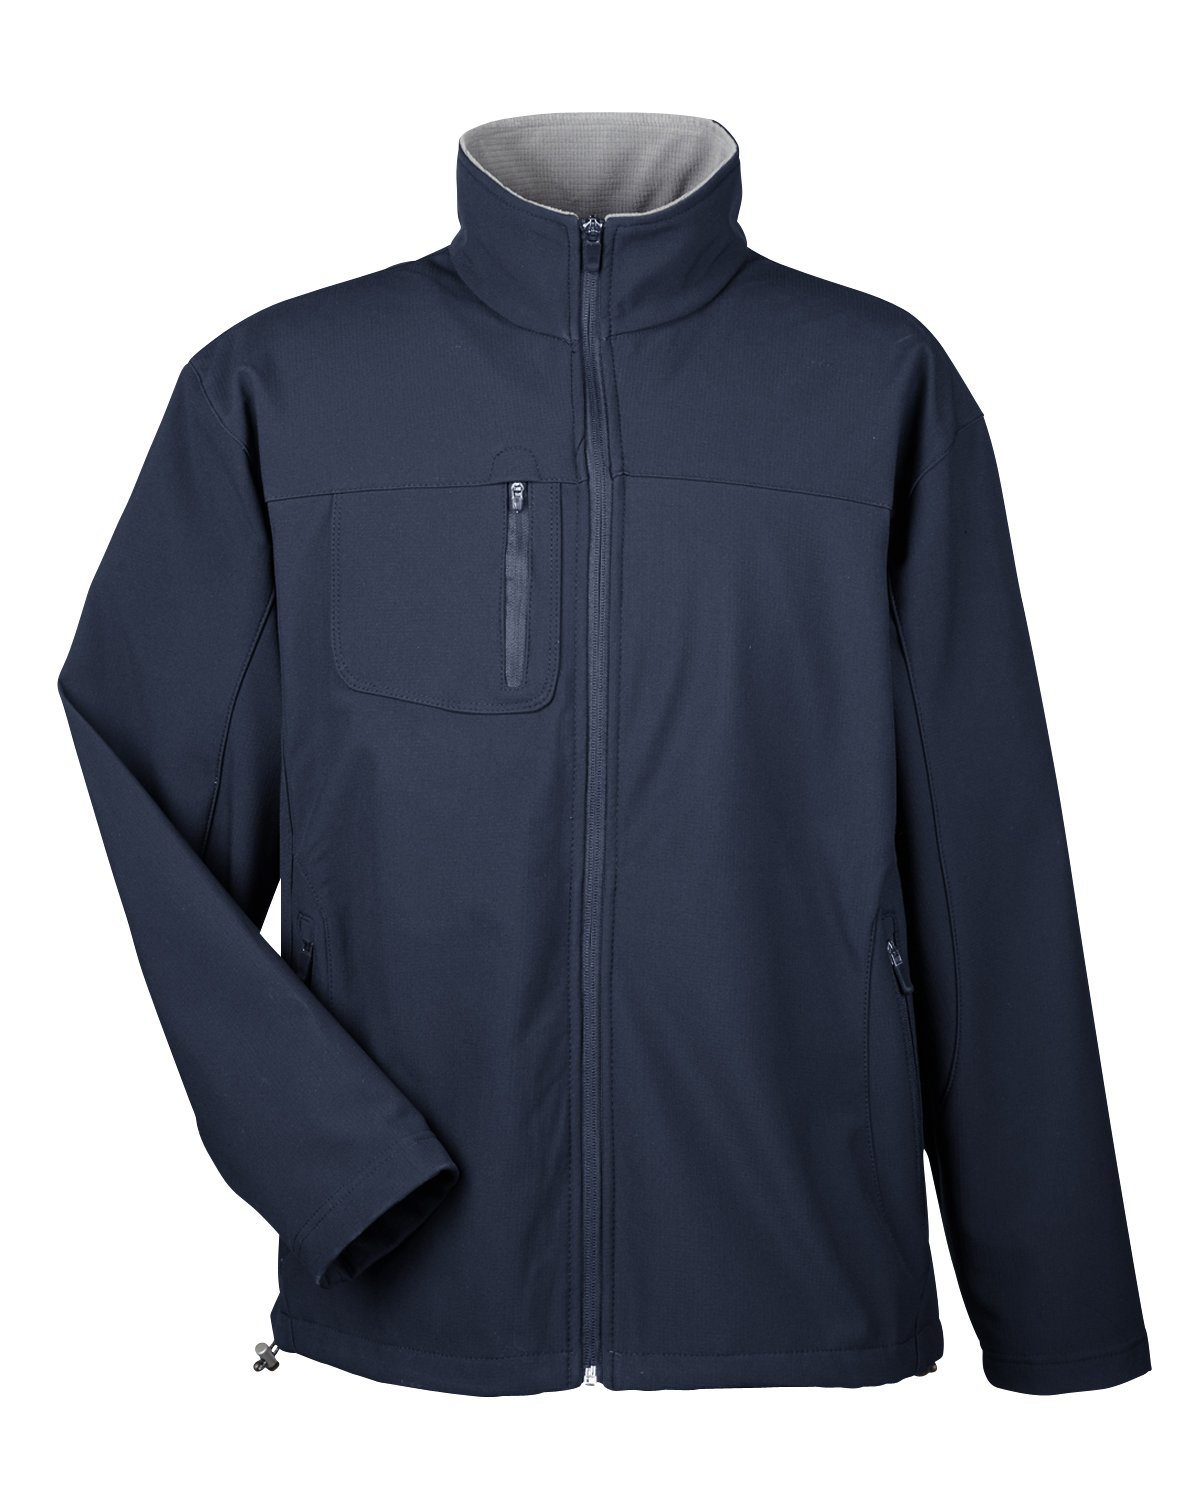 Ultra Club 8280 - Adult Soft-Shell Jacket with Cadet Collar $34.25